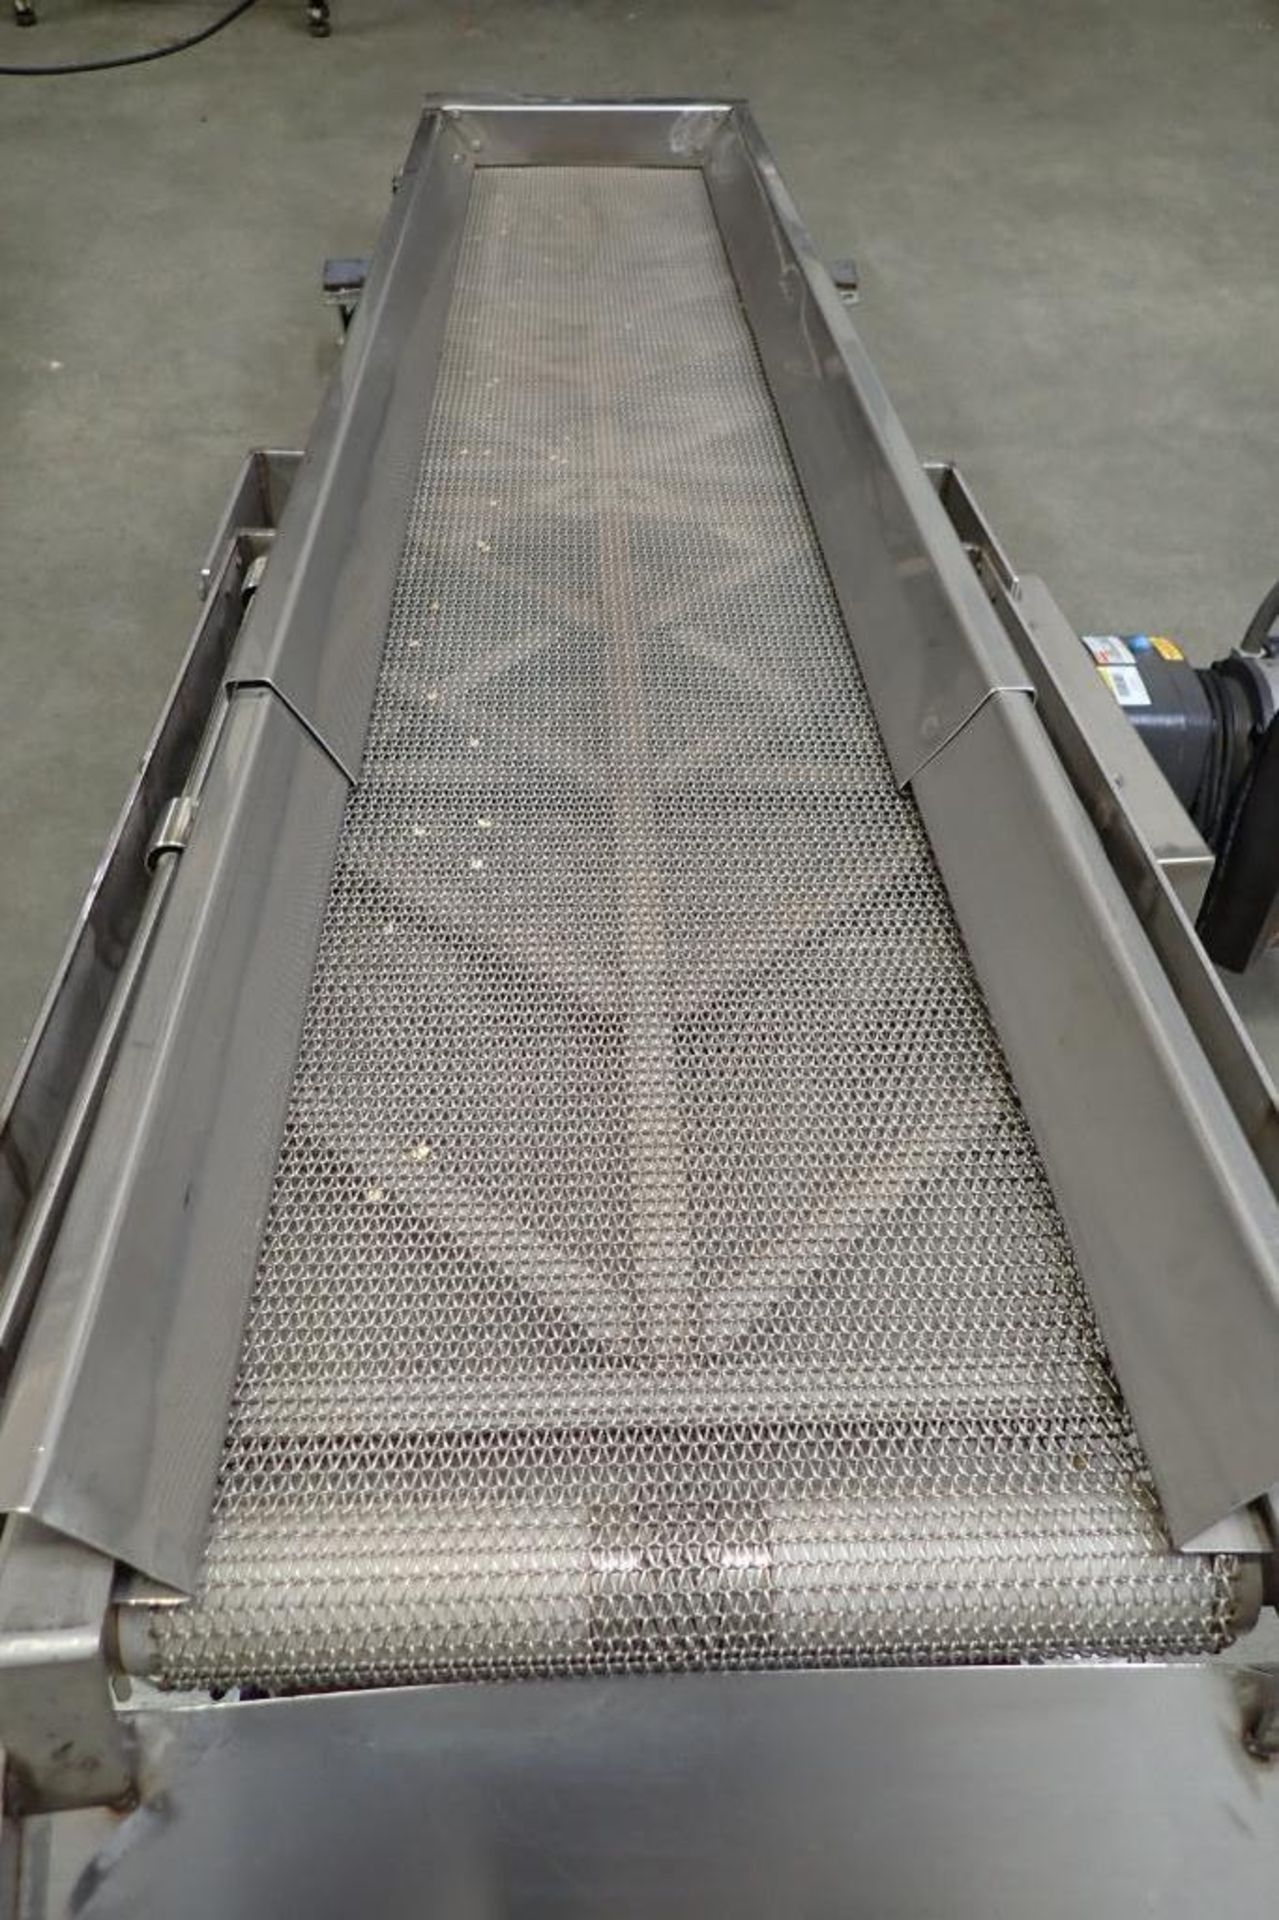 SS chain belt conveyor for scalping, 84 in. long x 15 in. wide, 32 in. discharge height, on wheels. - Image 3 of 8